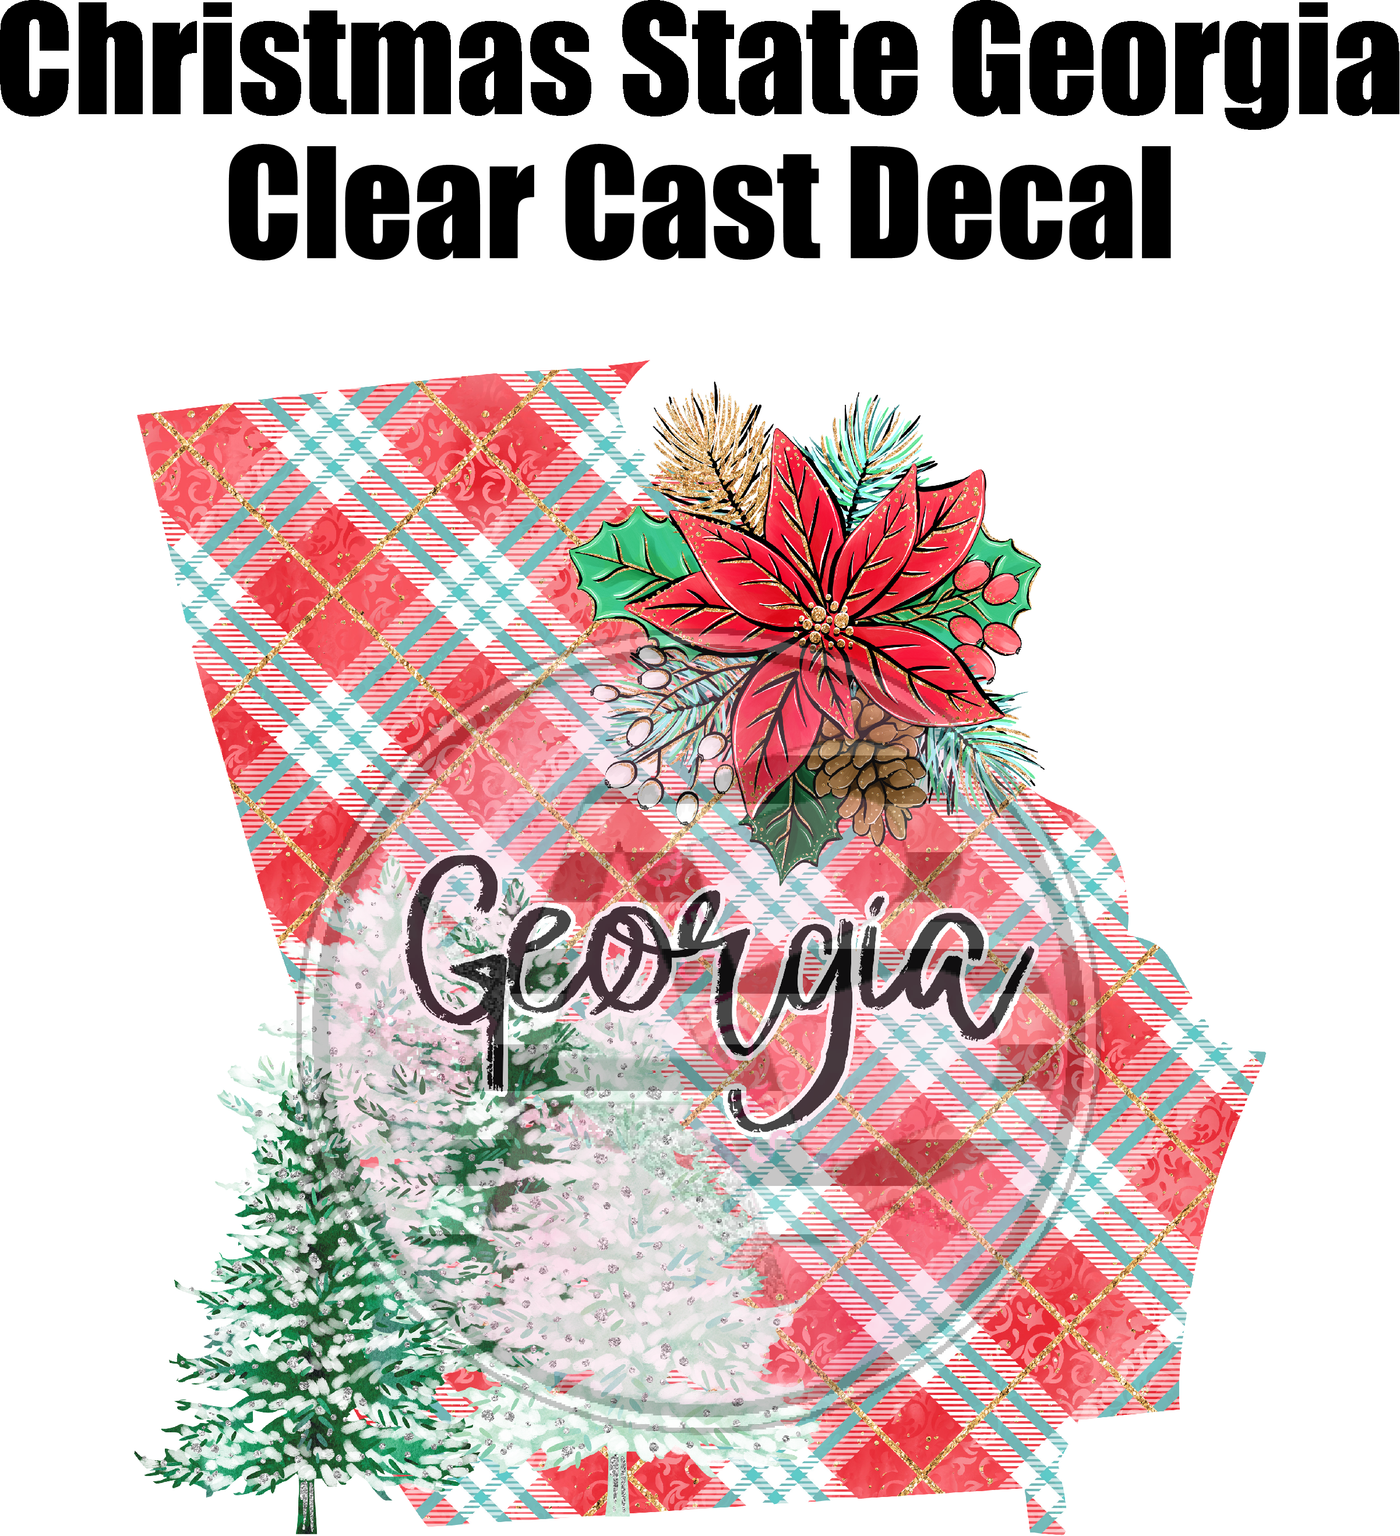 Christmas State Georgia - Clear Cast Decal